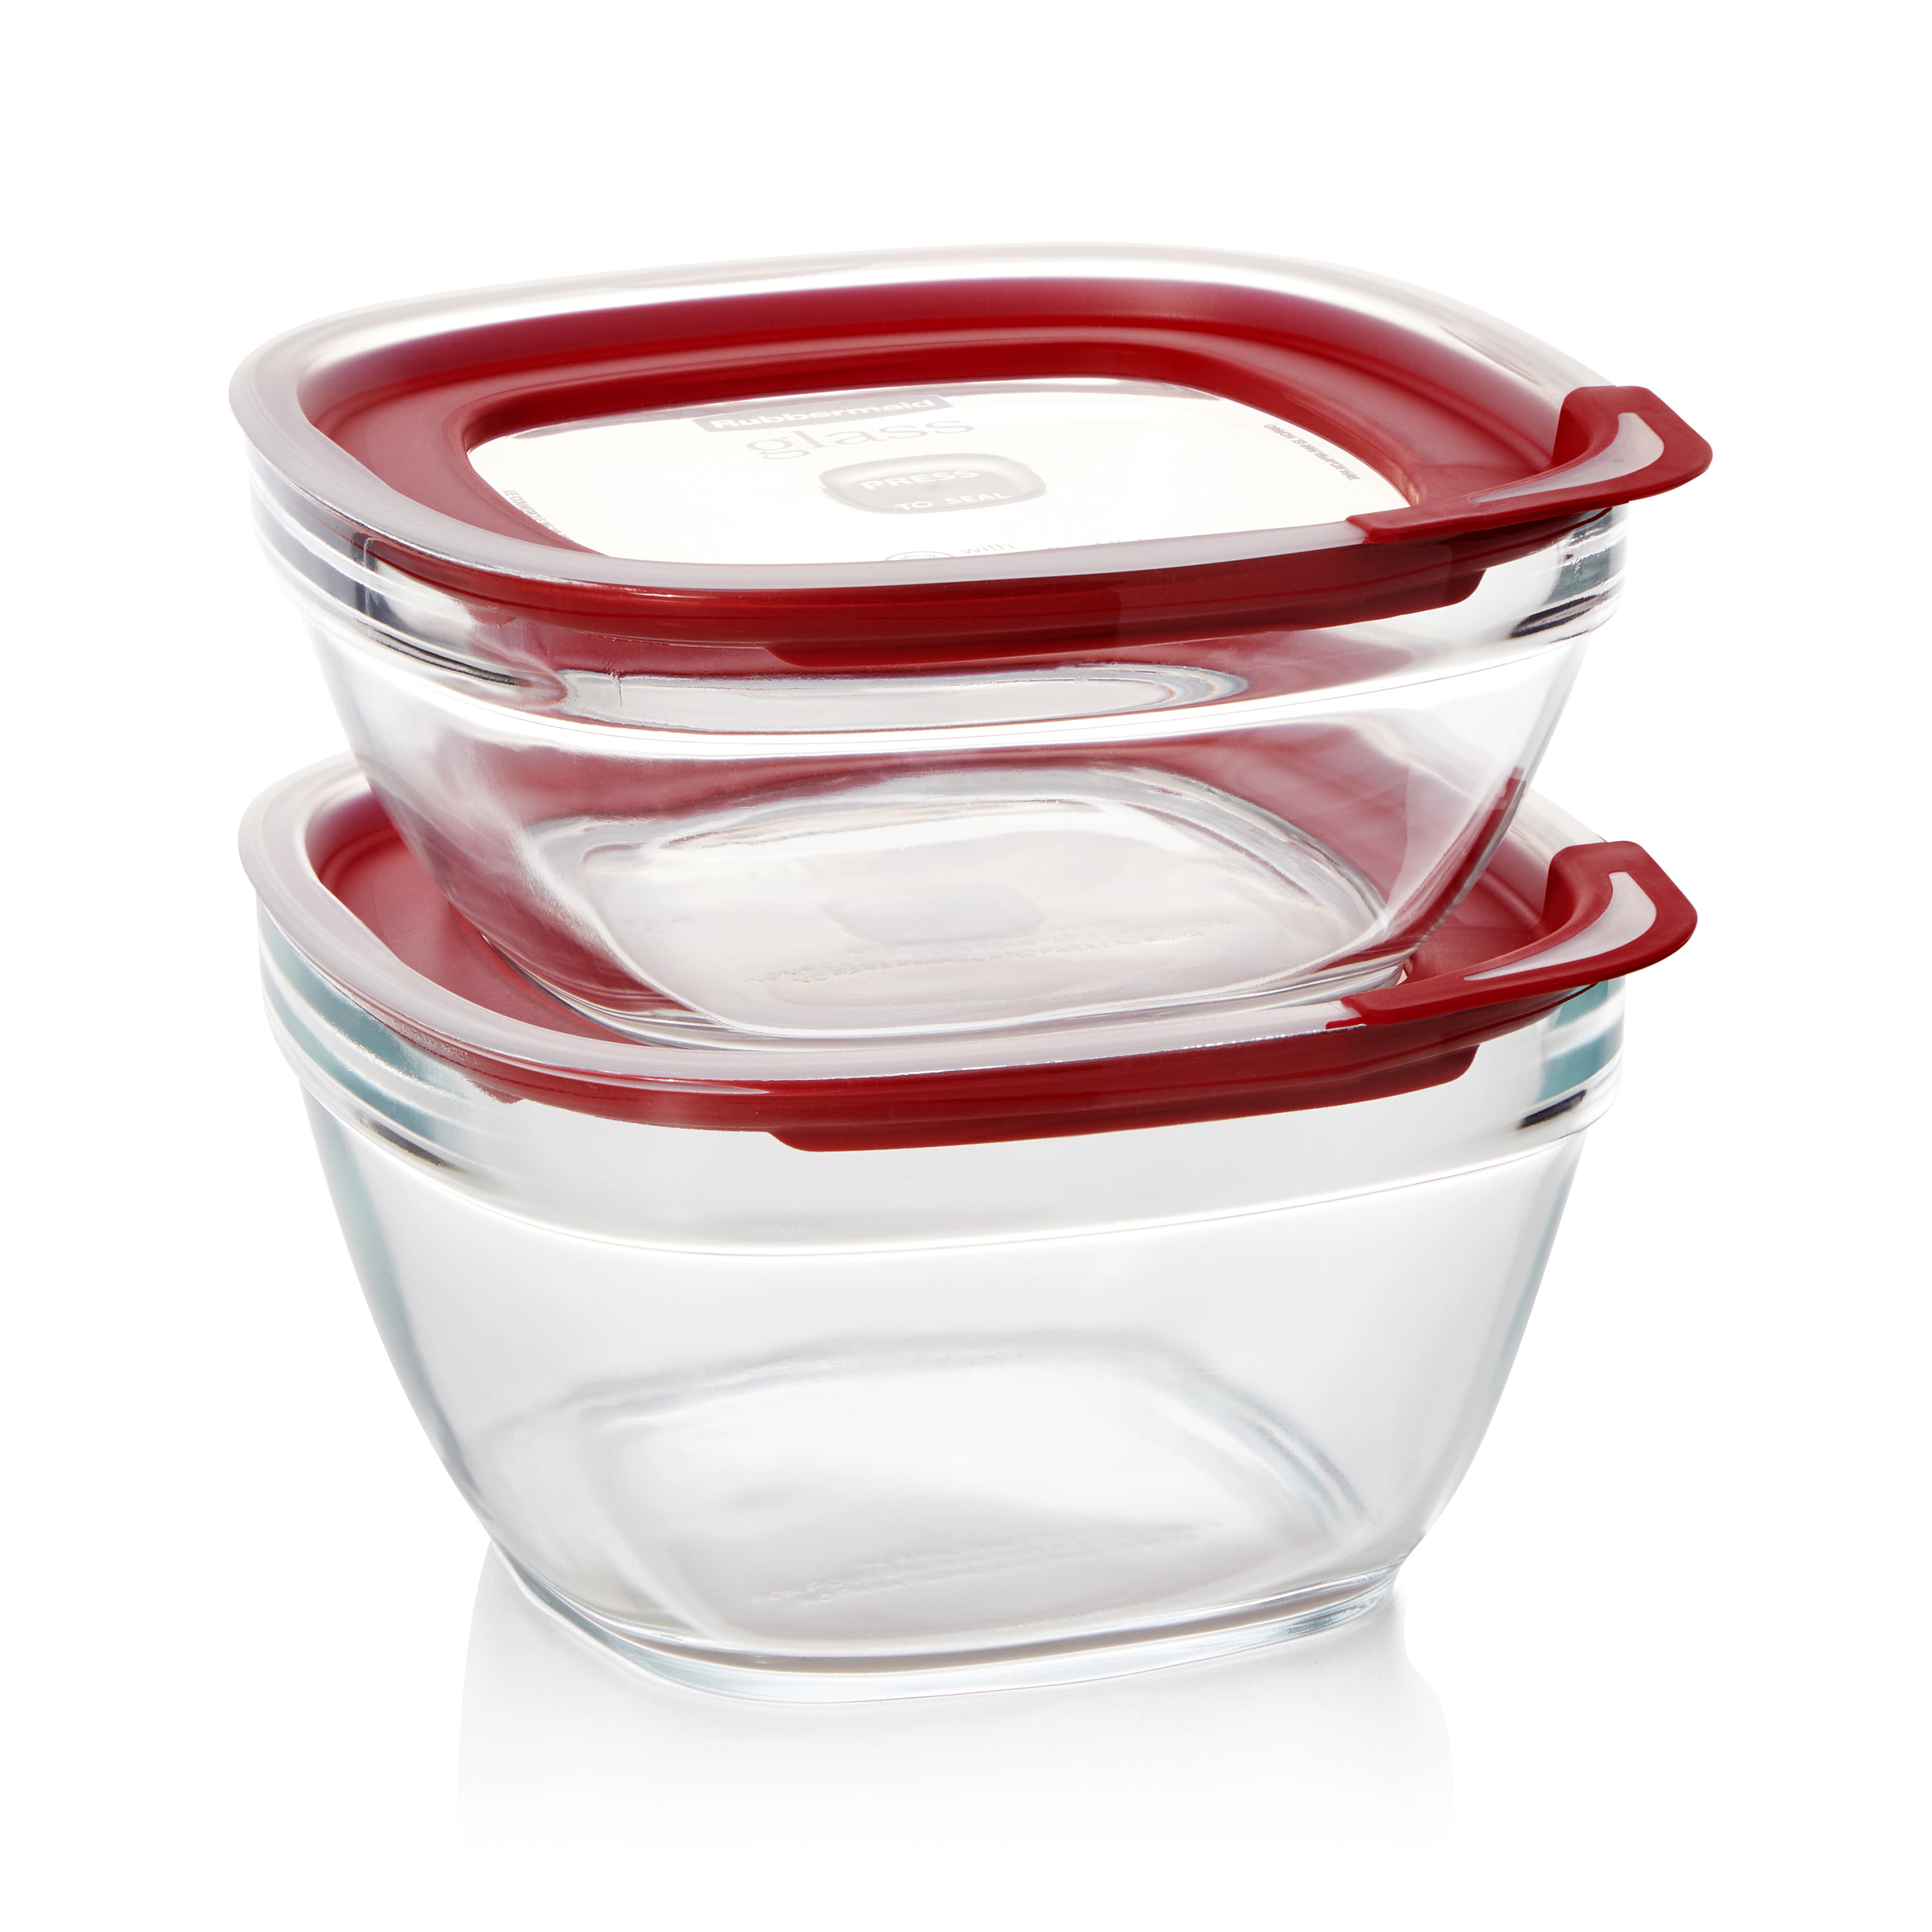 Rubbermaid, Kitchen, Rubbermaid Glass Food Storage Containers Easy Find  Vacuum Sealed Lids Set Of 4